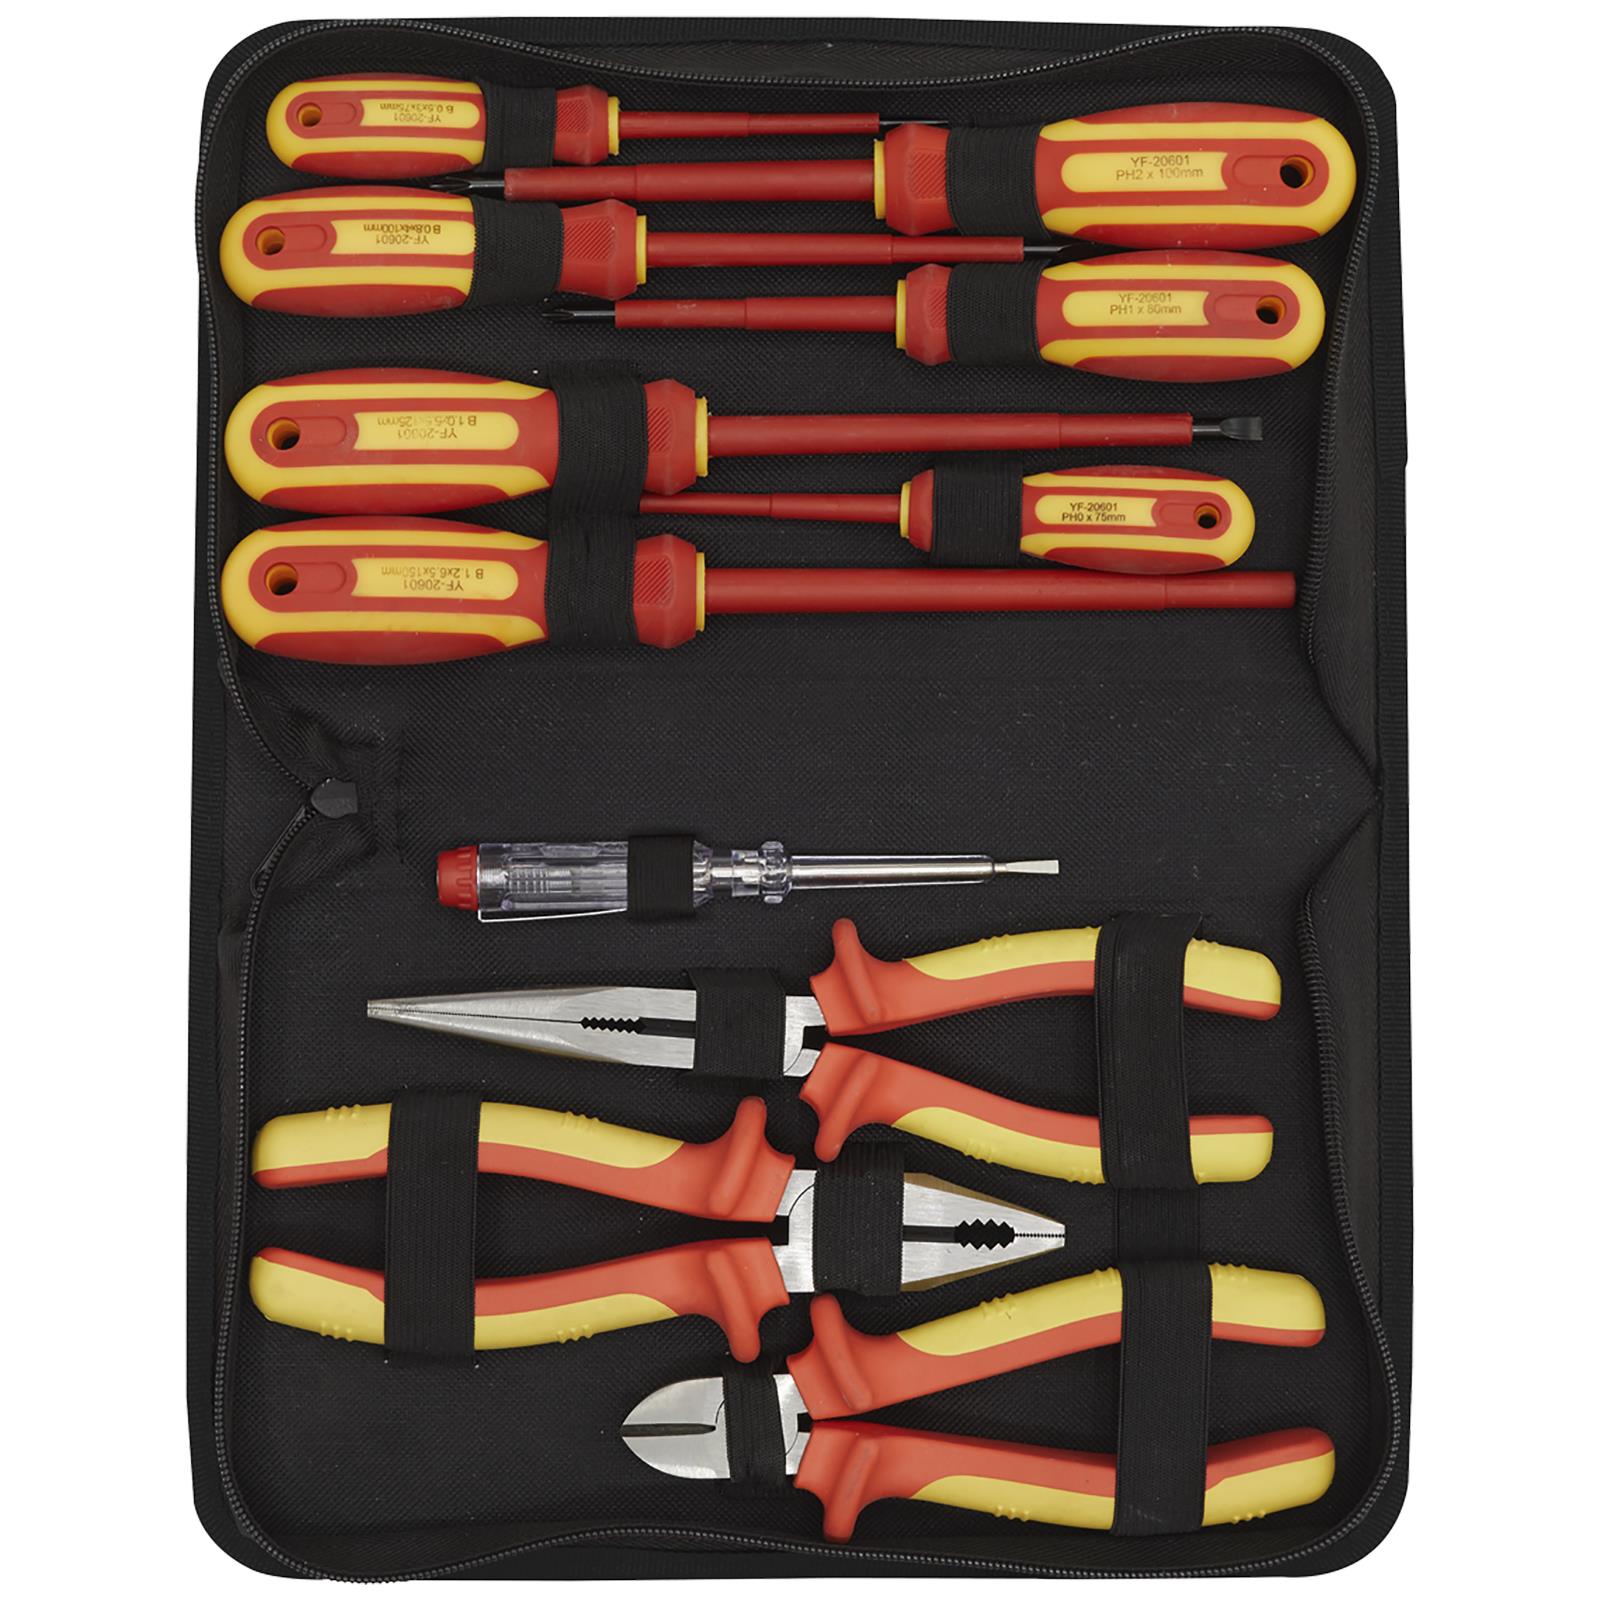 Siegen by Sealey Electrical VDE Tool Set 11 Piece Pliers Screwdrivers